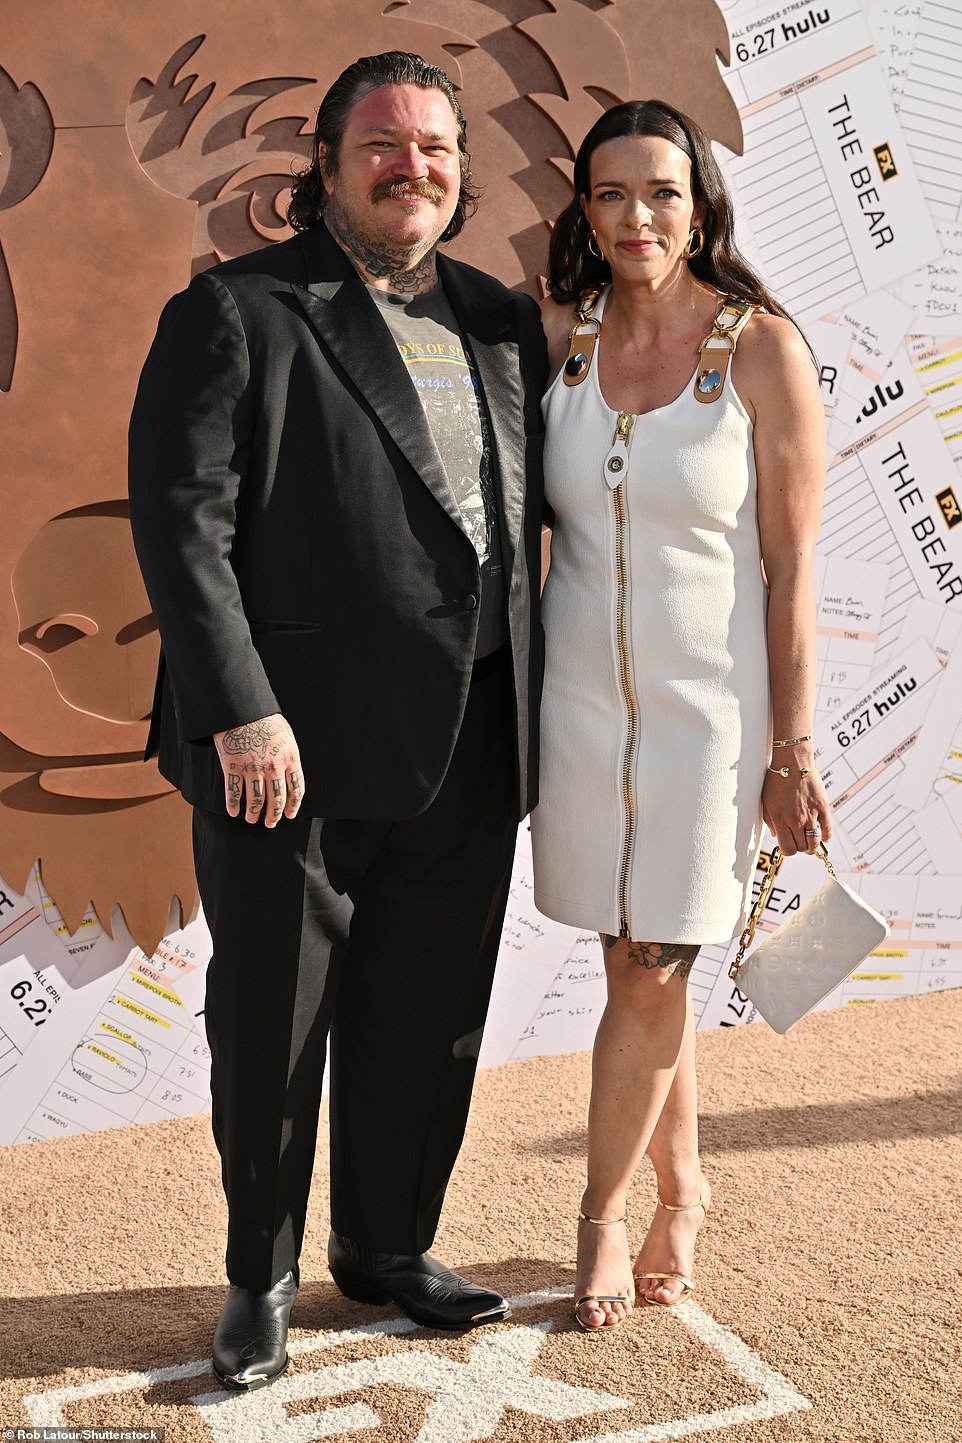 The real-life chef, 42, was accompanied to the premiere by his gorgeous wife of 10 years, Trish Spencer